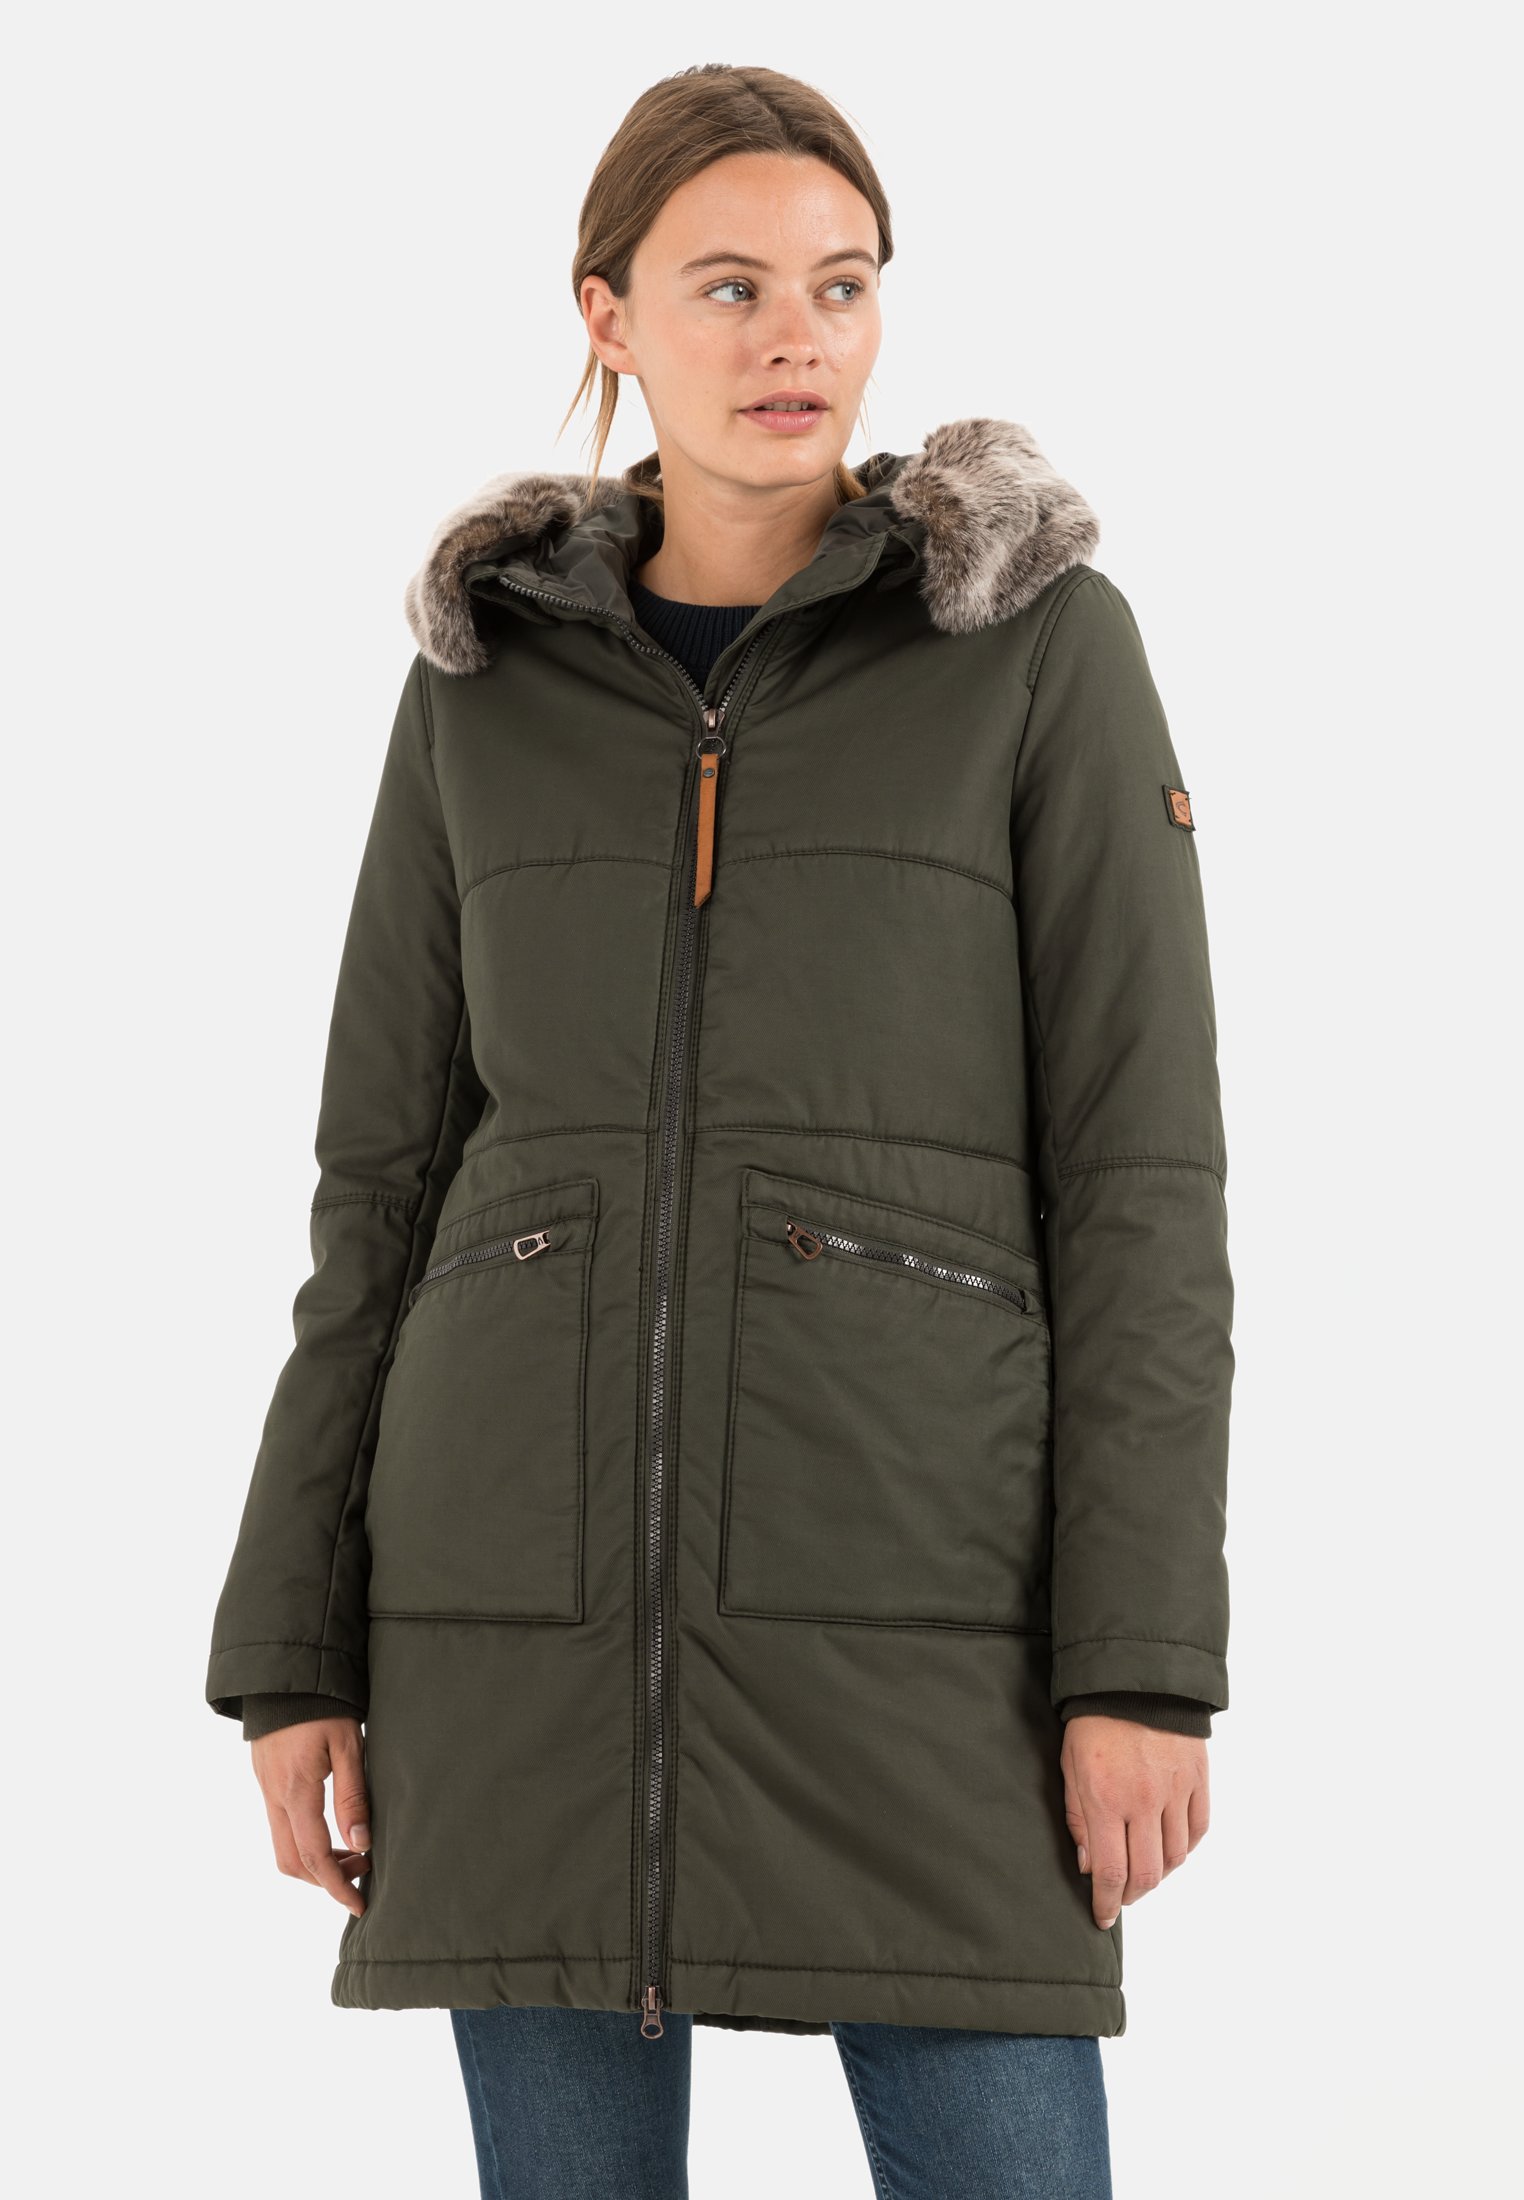 Camel Active Parka with slit pockets at chest height